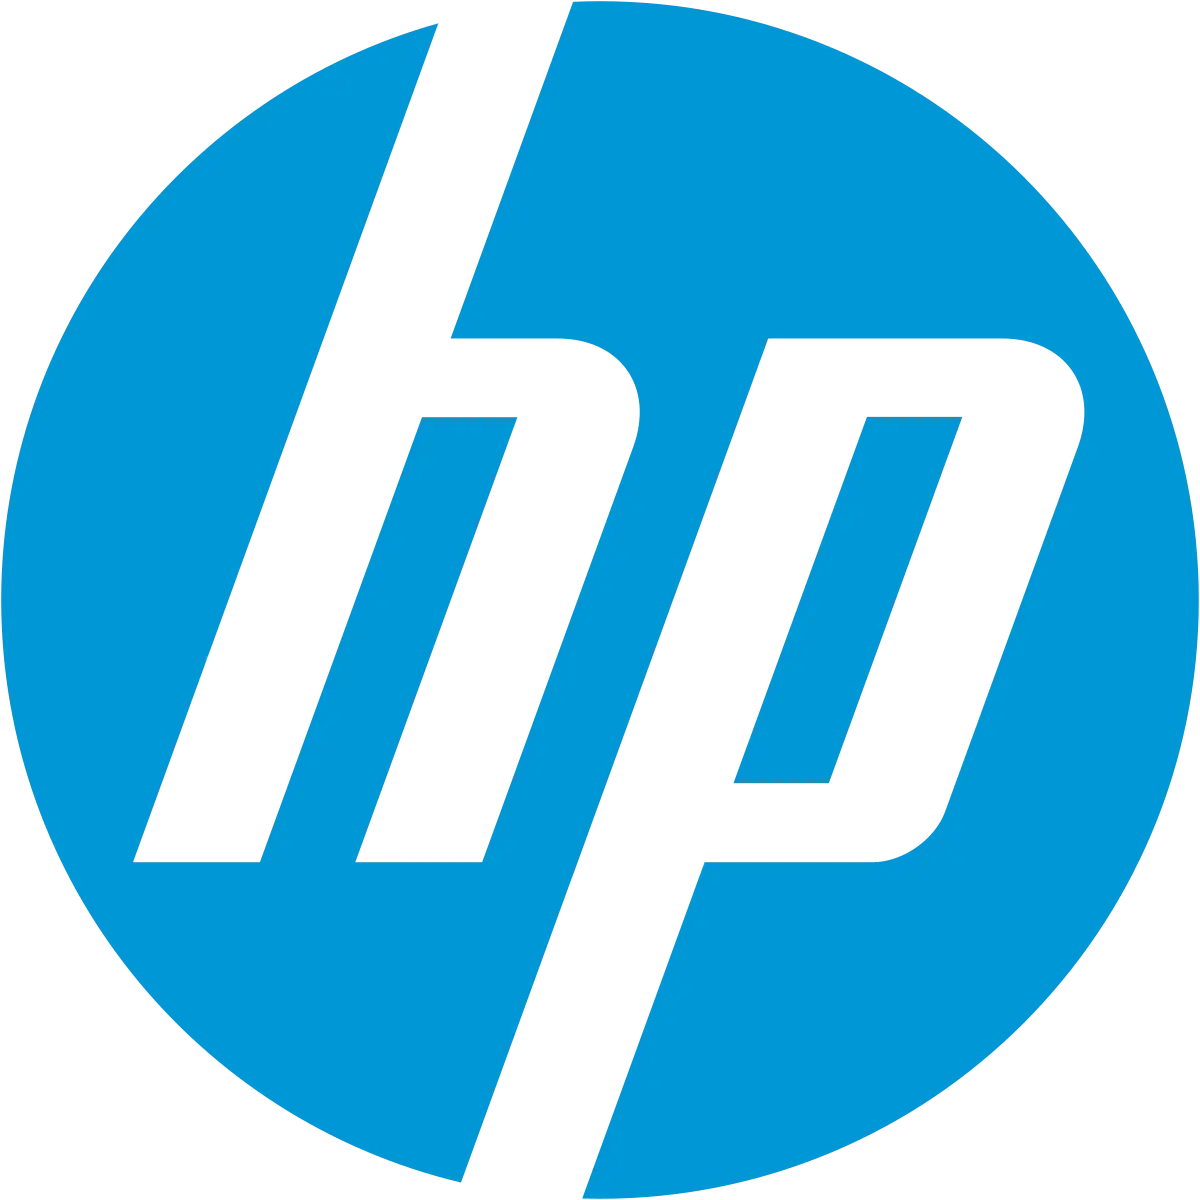 Hewlett packard's innovation history: from calculators to 3d printing